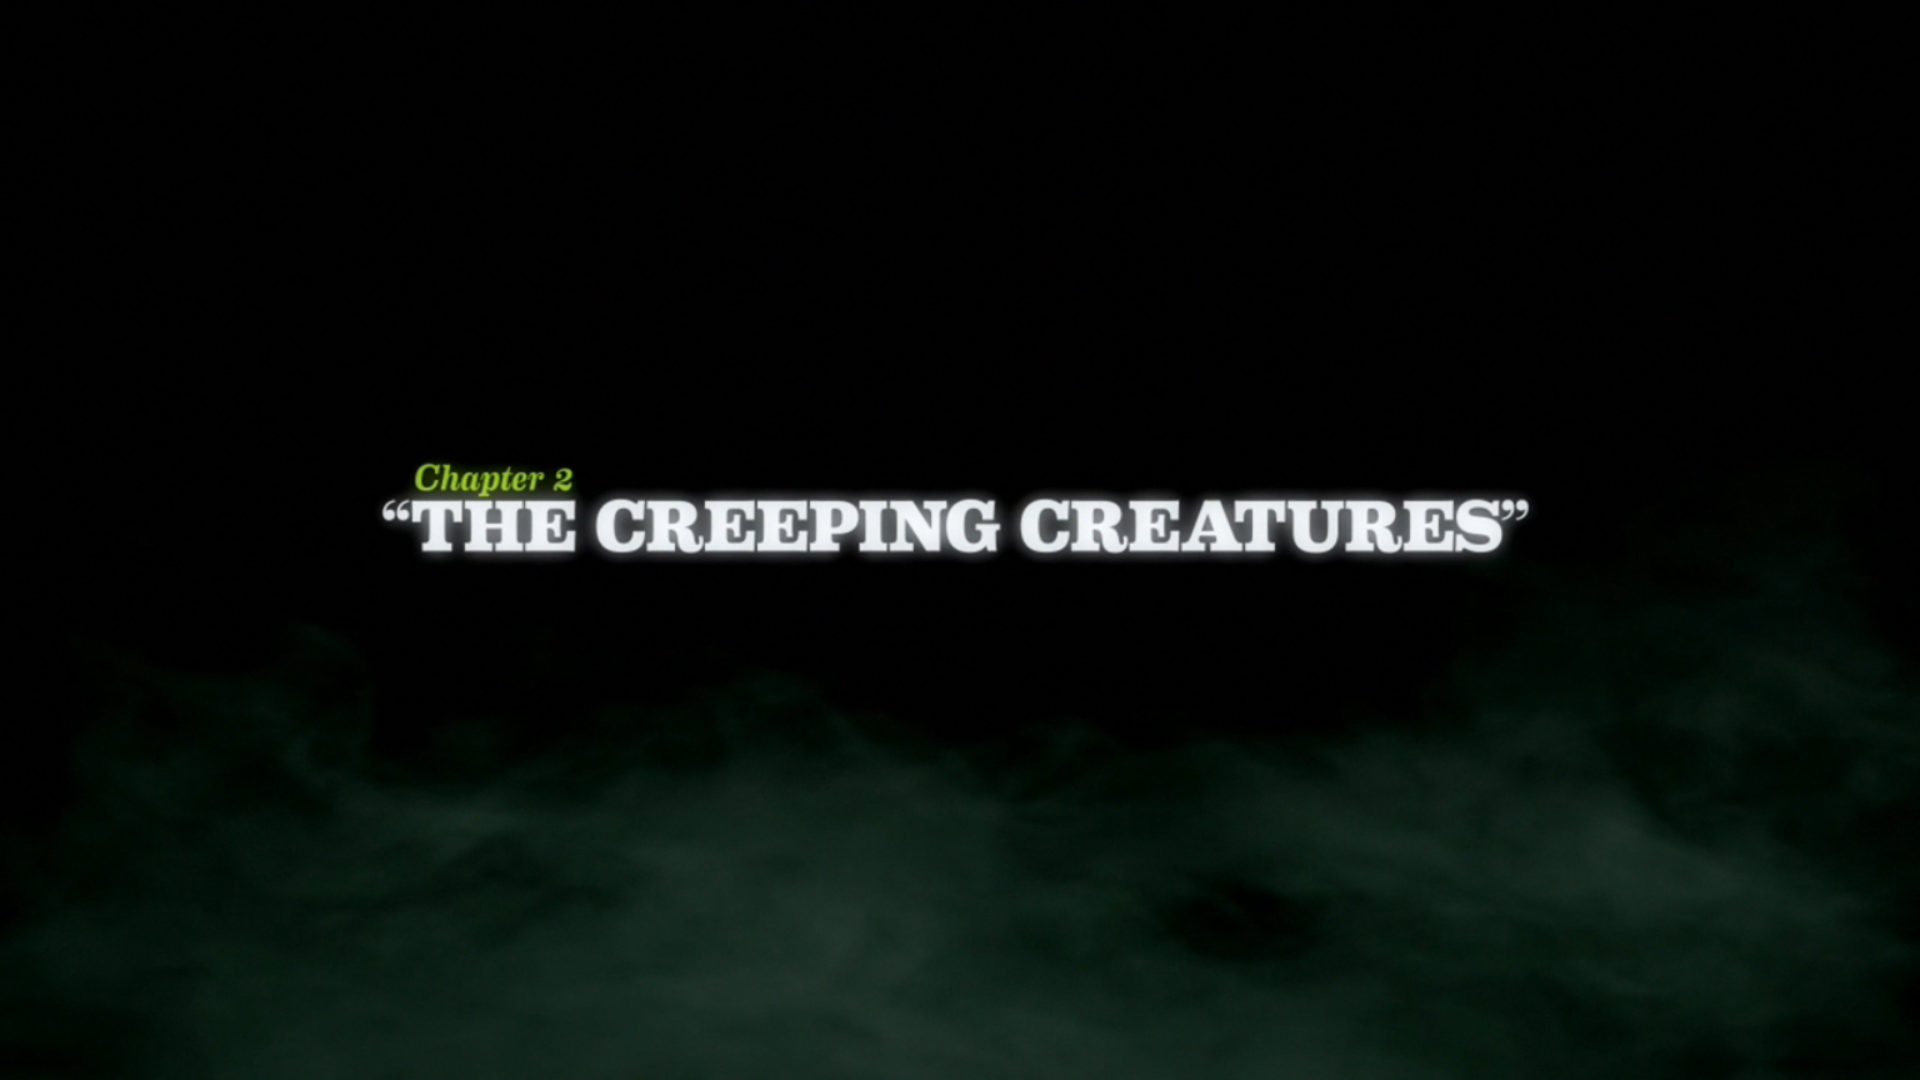 The_Creeping_Creatures_title_card